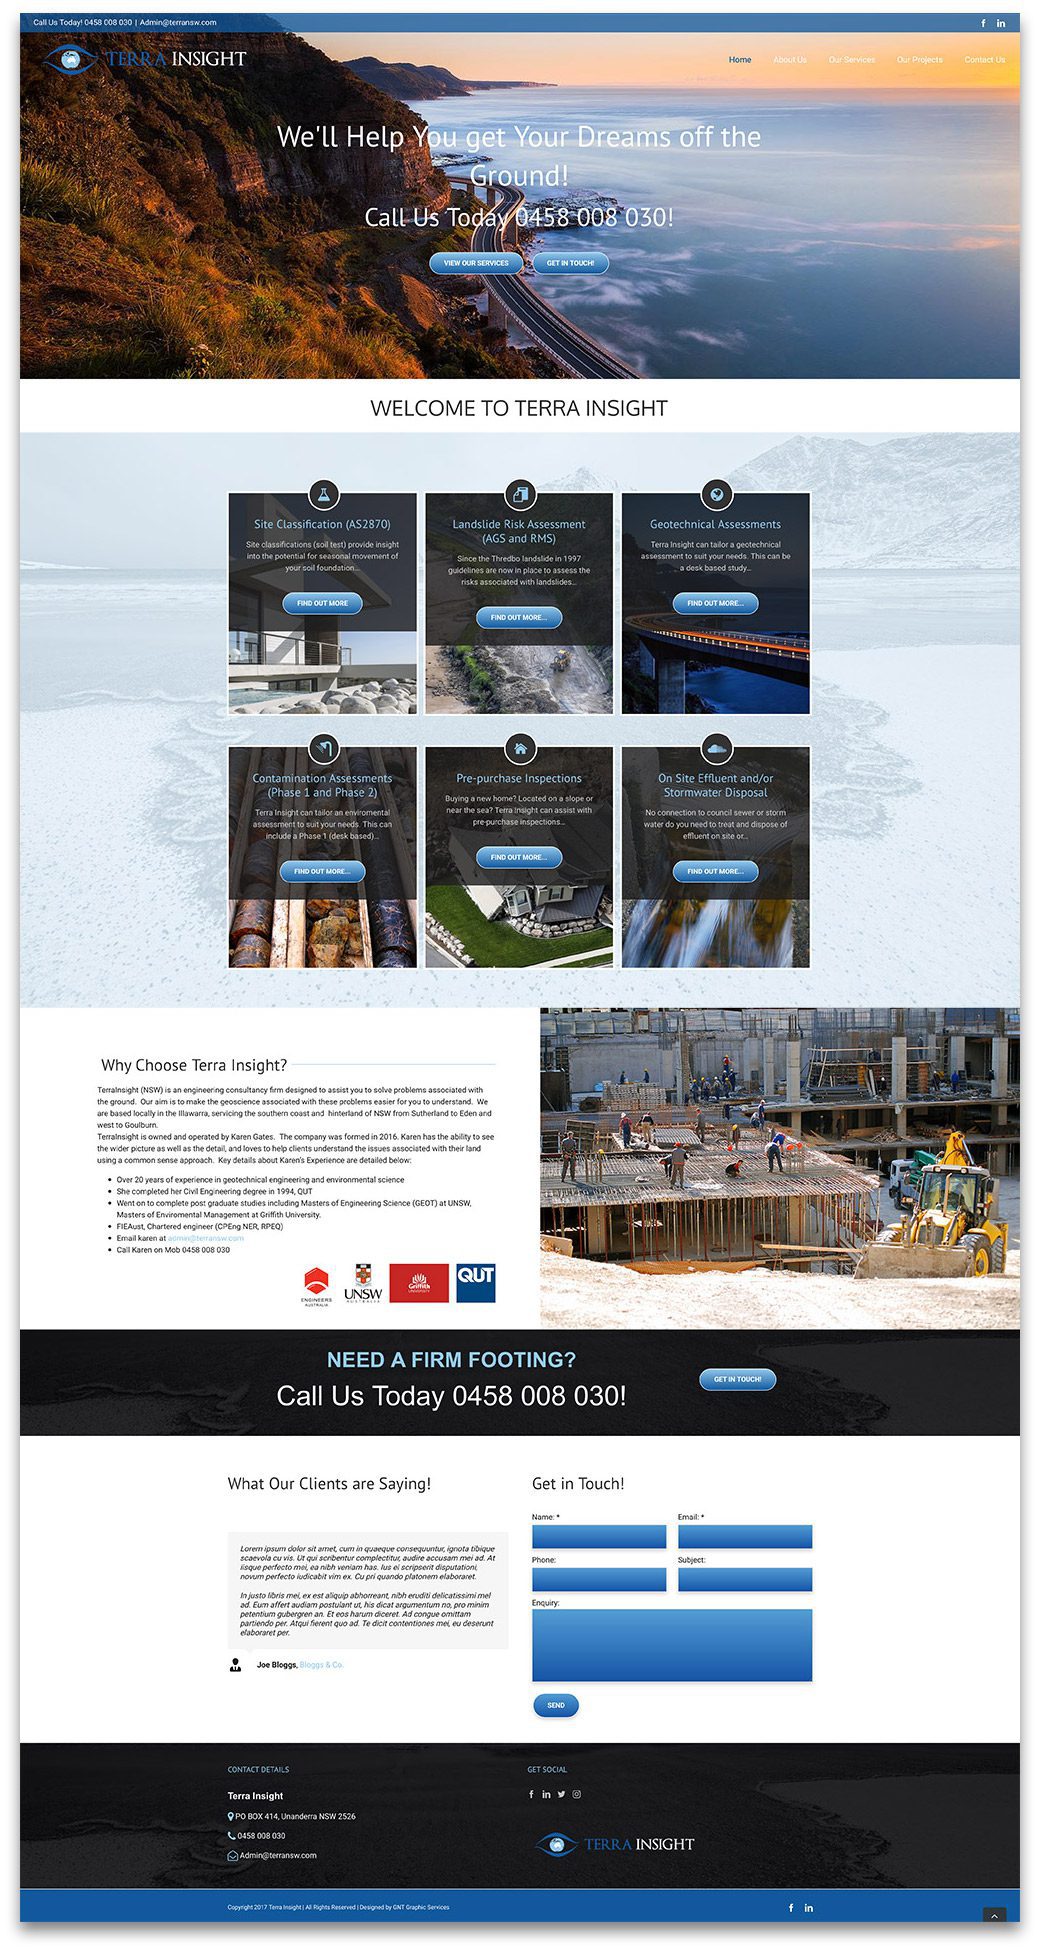 Terra Insight Website deigned & built by GNT Graphic Services